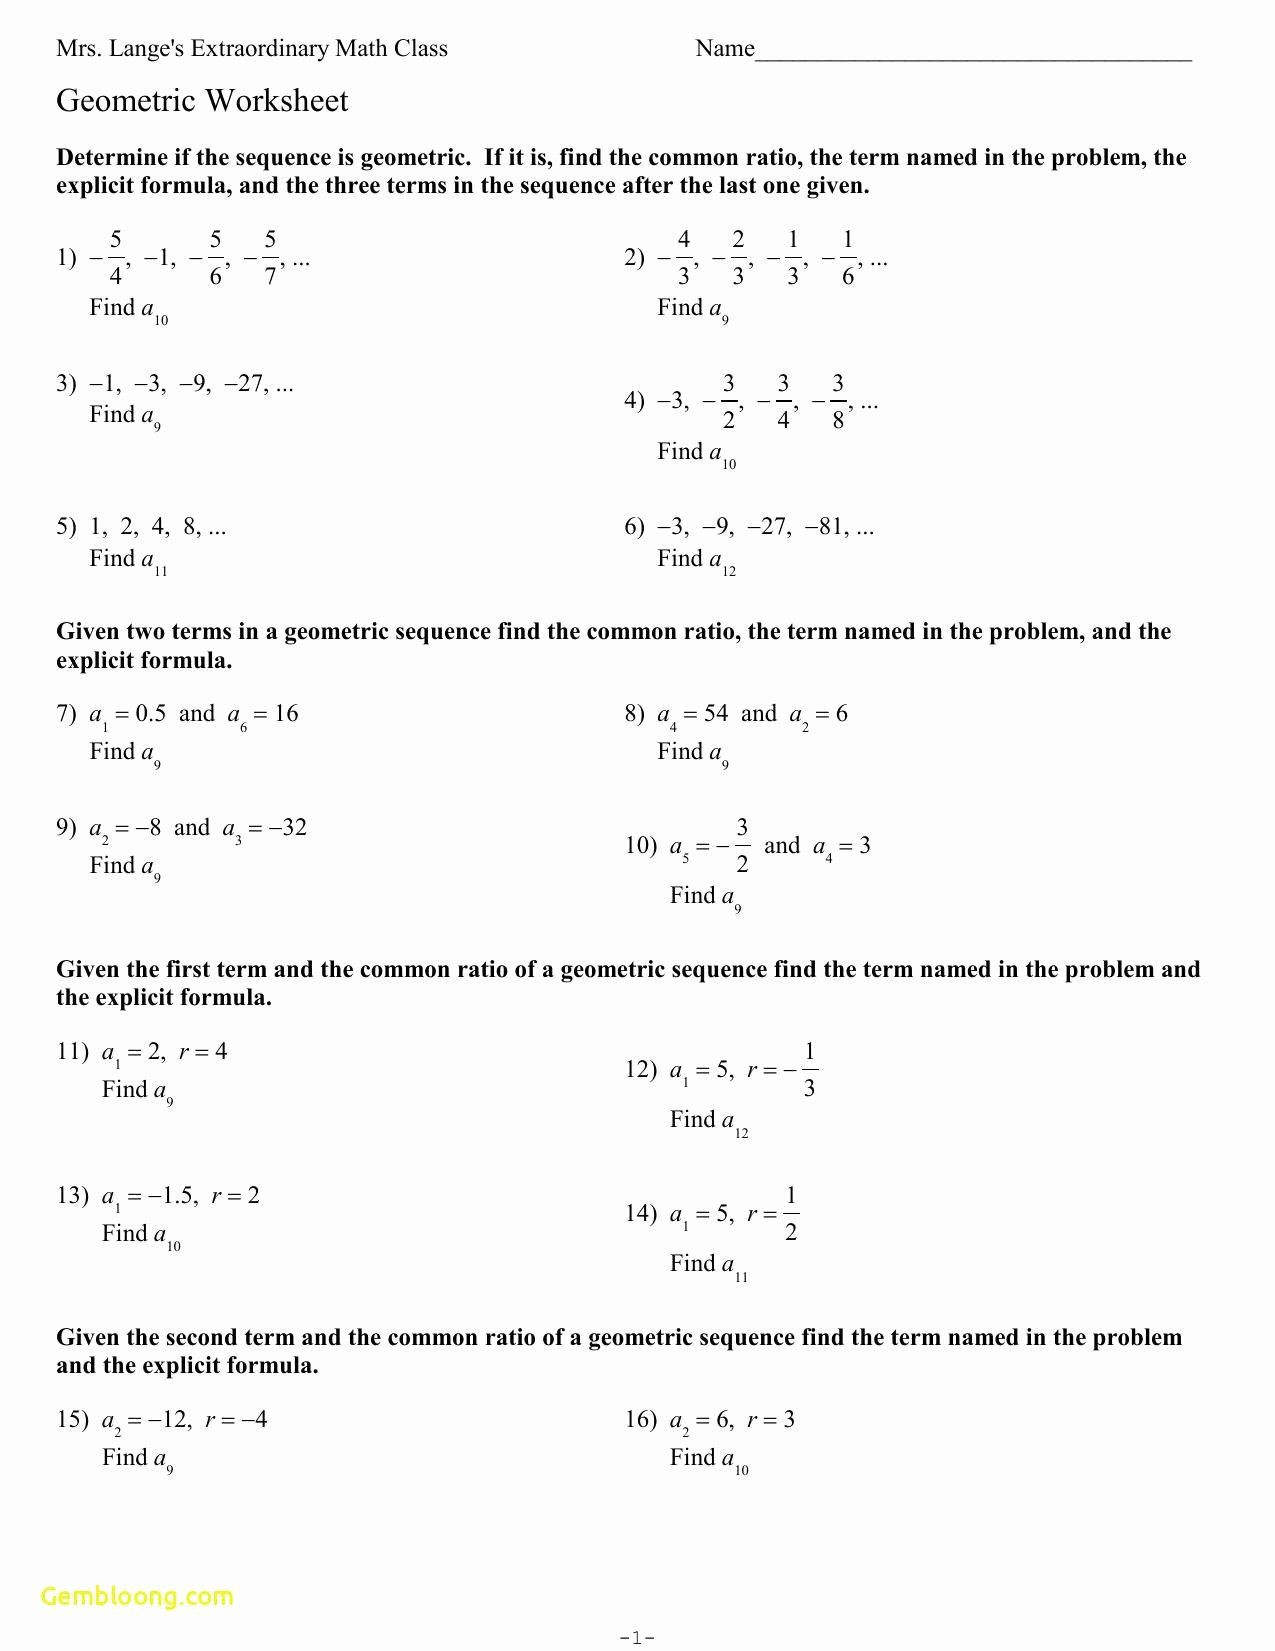 Geometric Sequence Worksheet Answers 50 Arithmetic Sequence Worksheet Answers In 2020 with